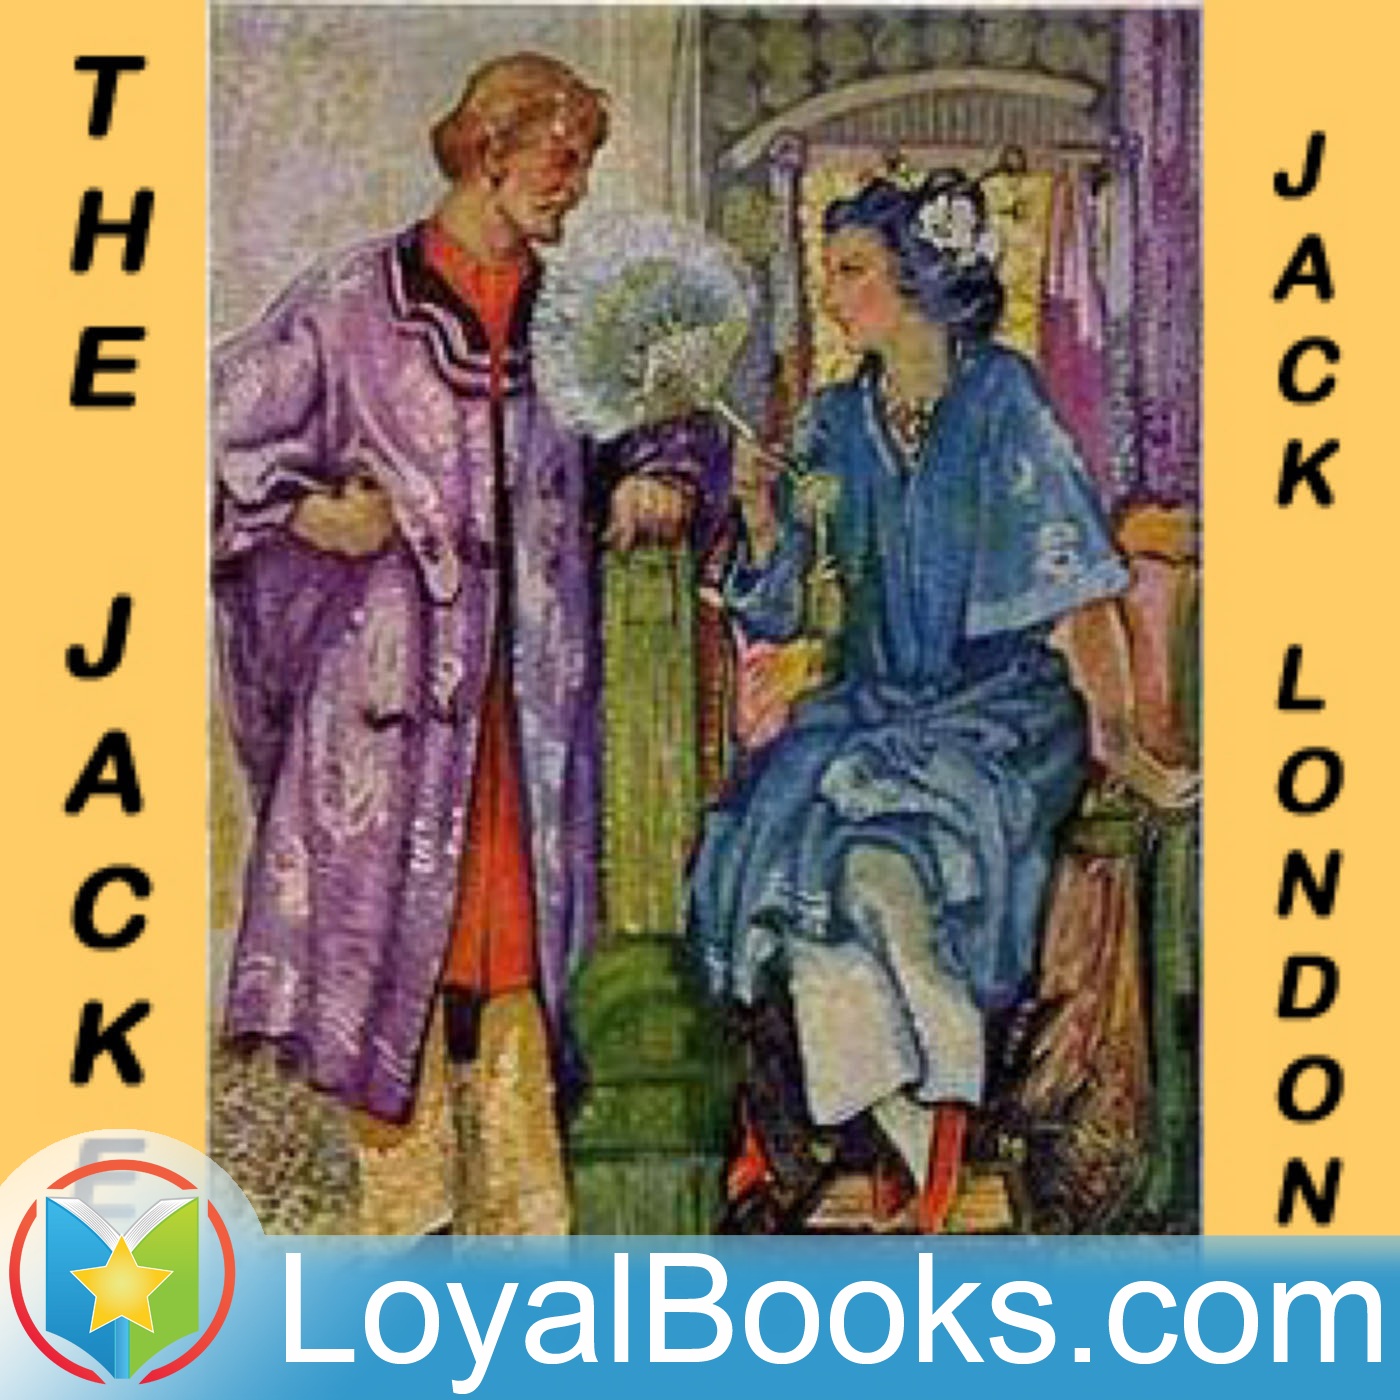 The Jacket (or Star Rover) by Jack London